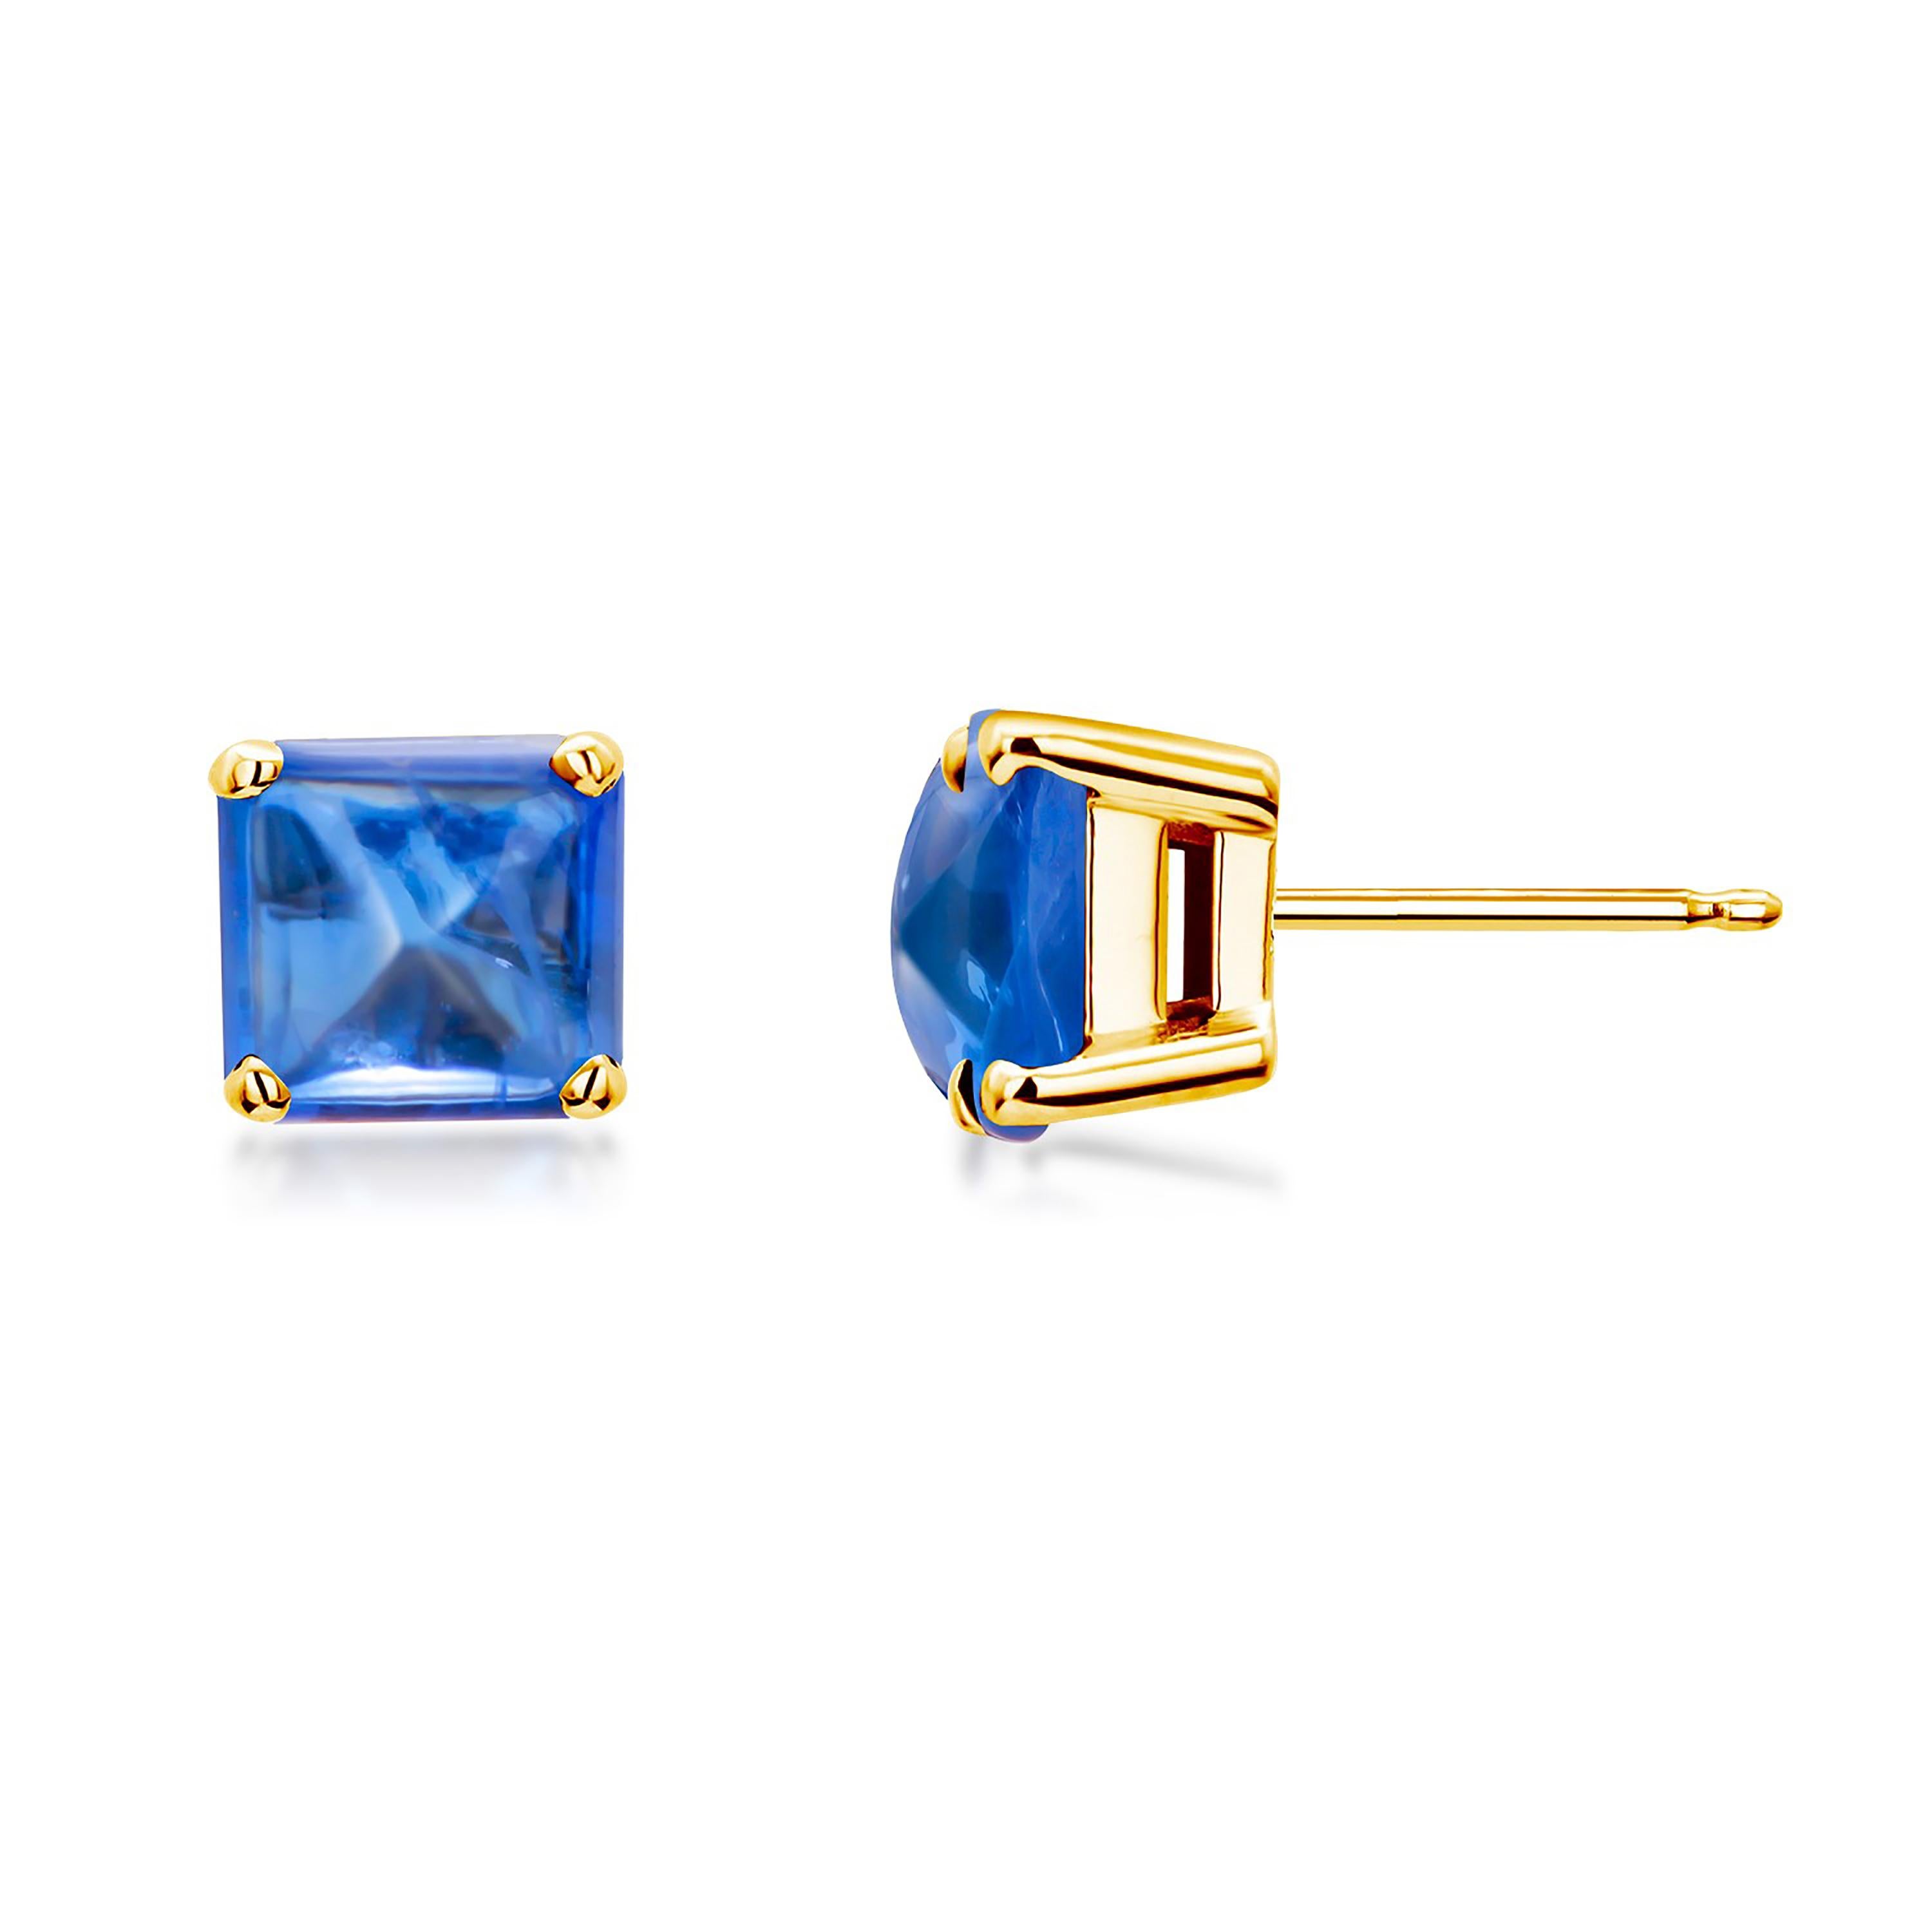 Square Emerald Shaped Sugarloaf Ceylon Cabochon Sapphire Gold Stud Earrings 1